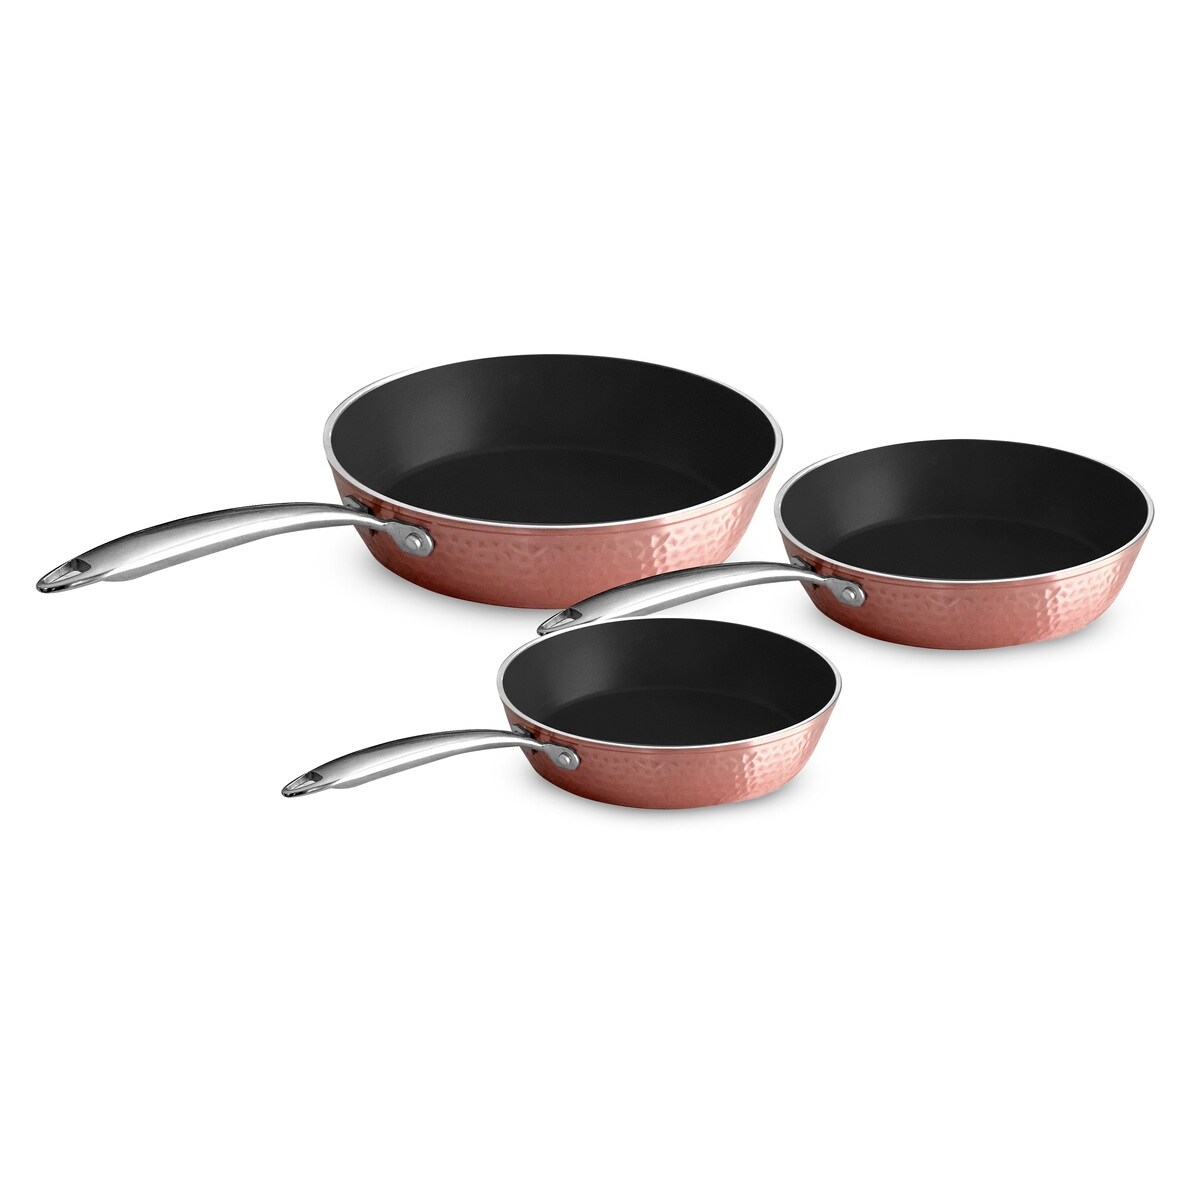 OrGREENiC Ceramic Pots and Pans for Cooking - 22 Piece Cookware Set with  Glass Lids, Rose Hammered